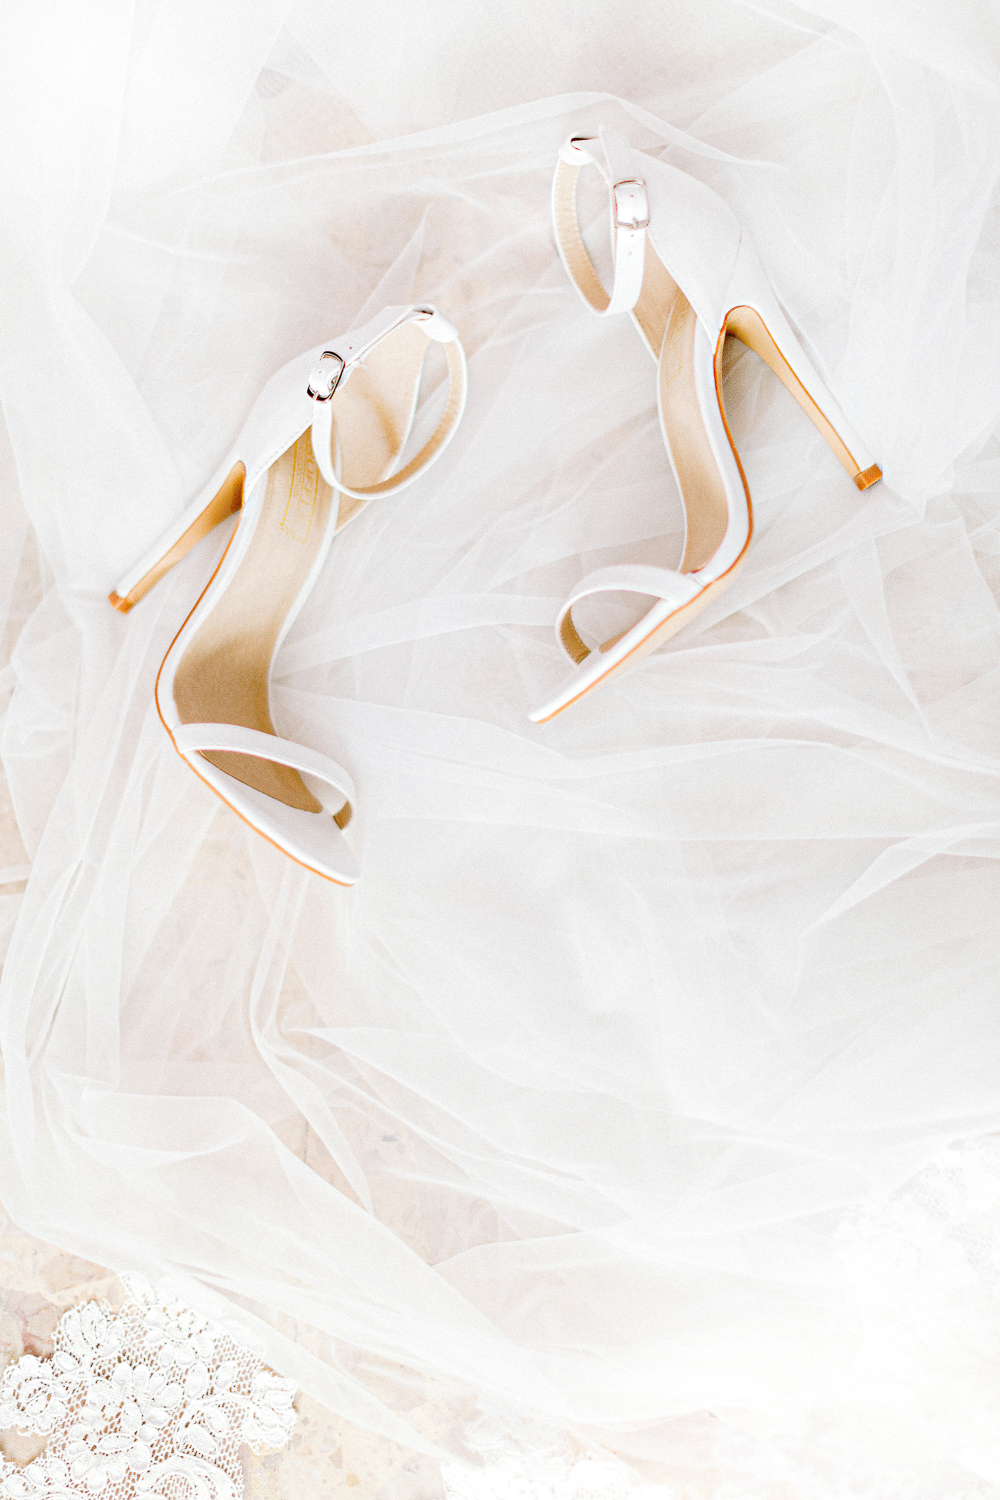 Wedding day bridal details tip shoes with veil image